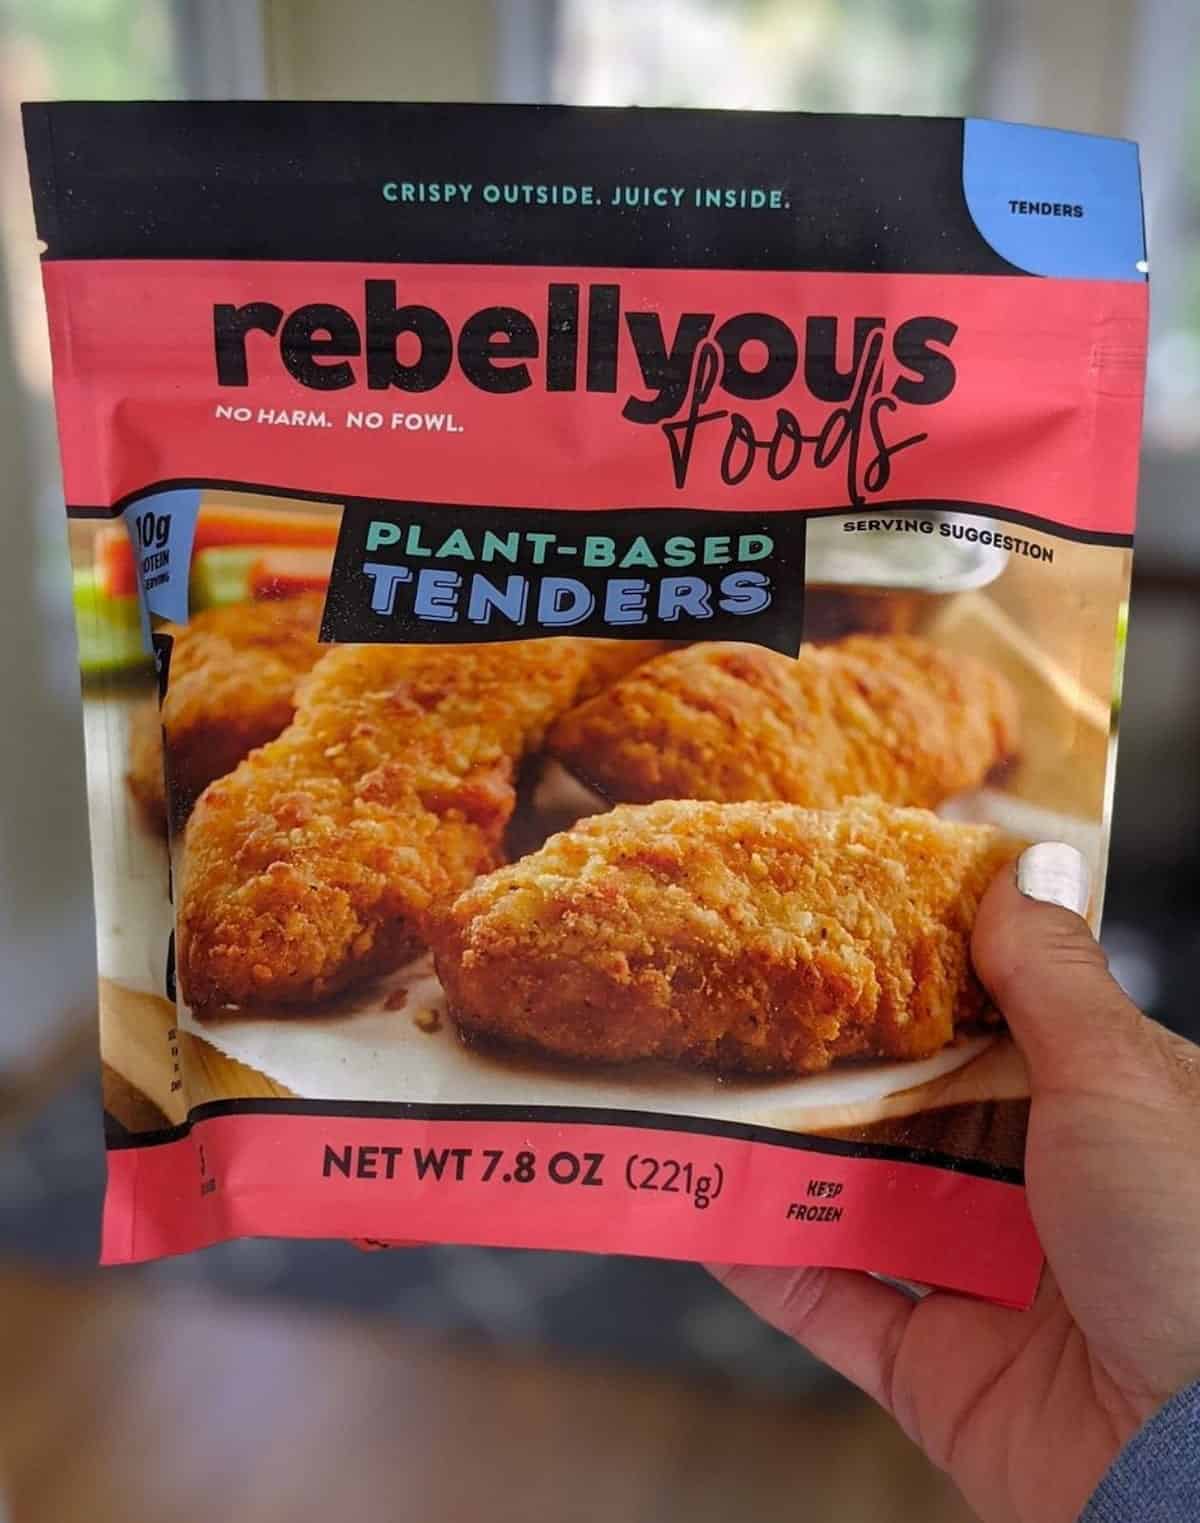 A package of Rebellyous Foods brand plant-based chicken.